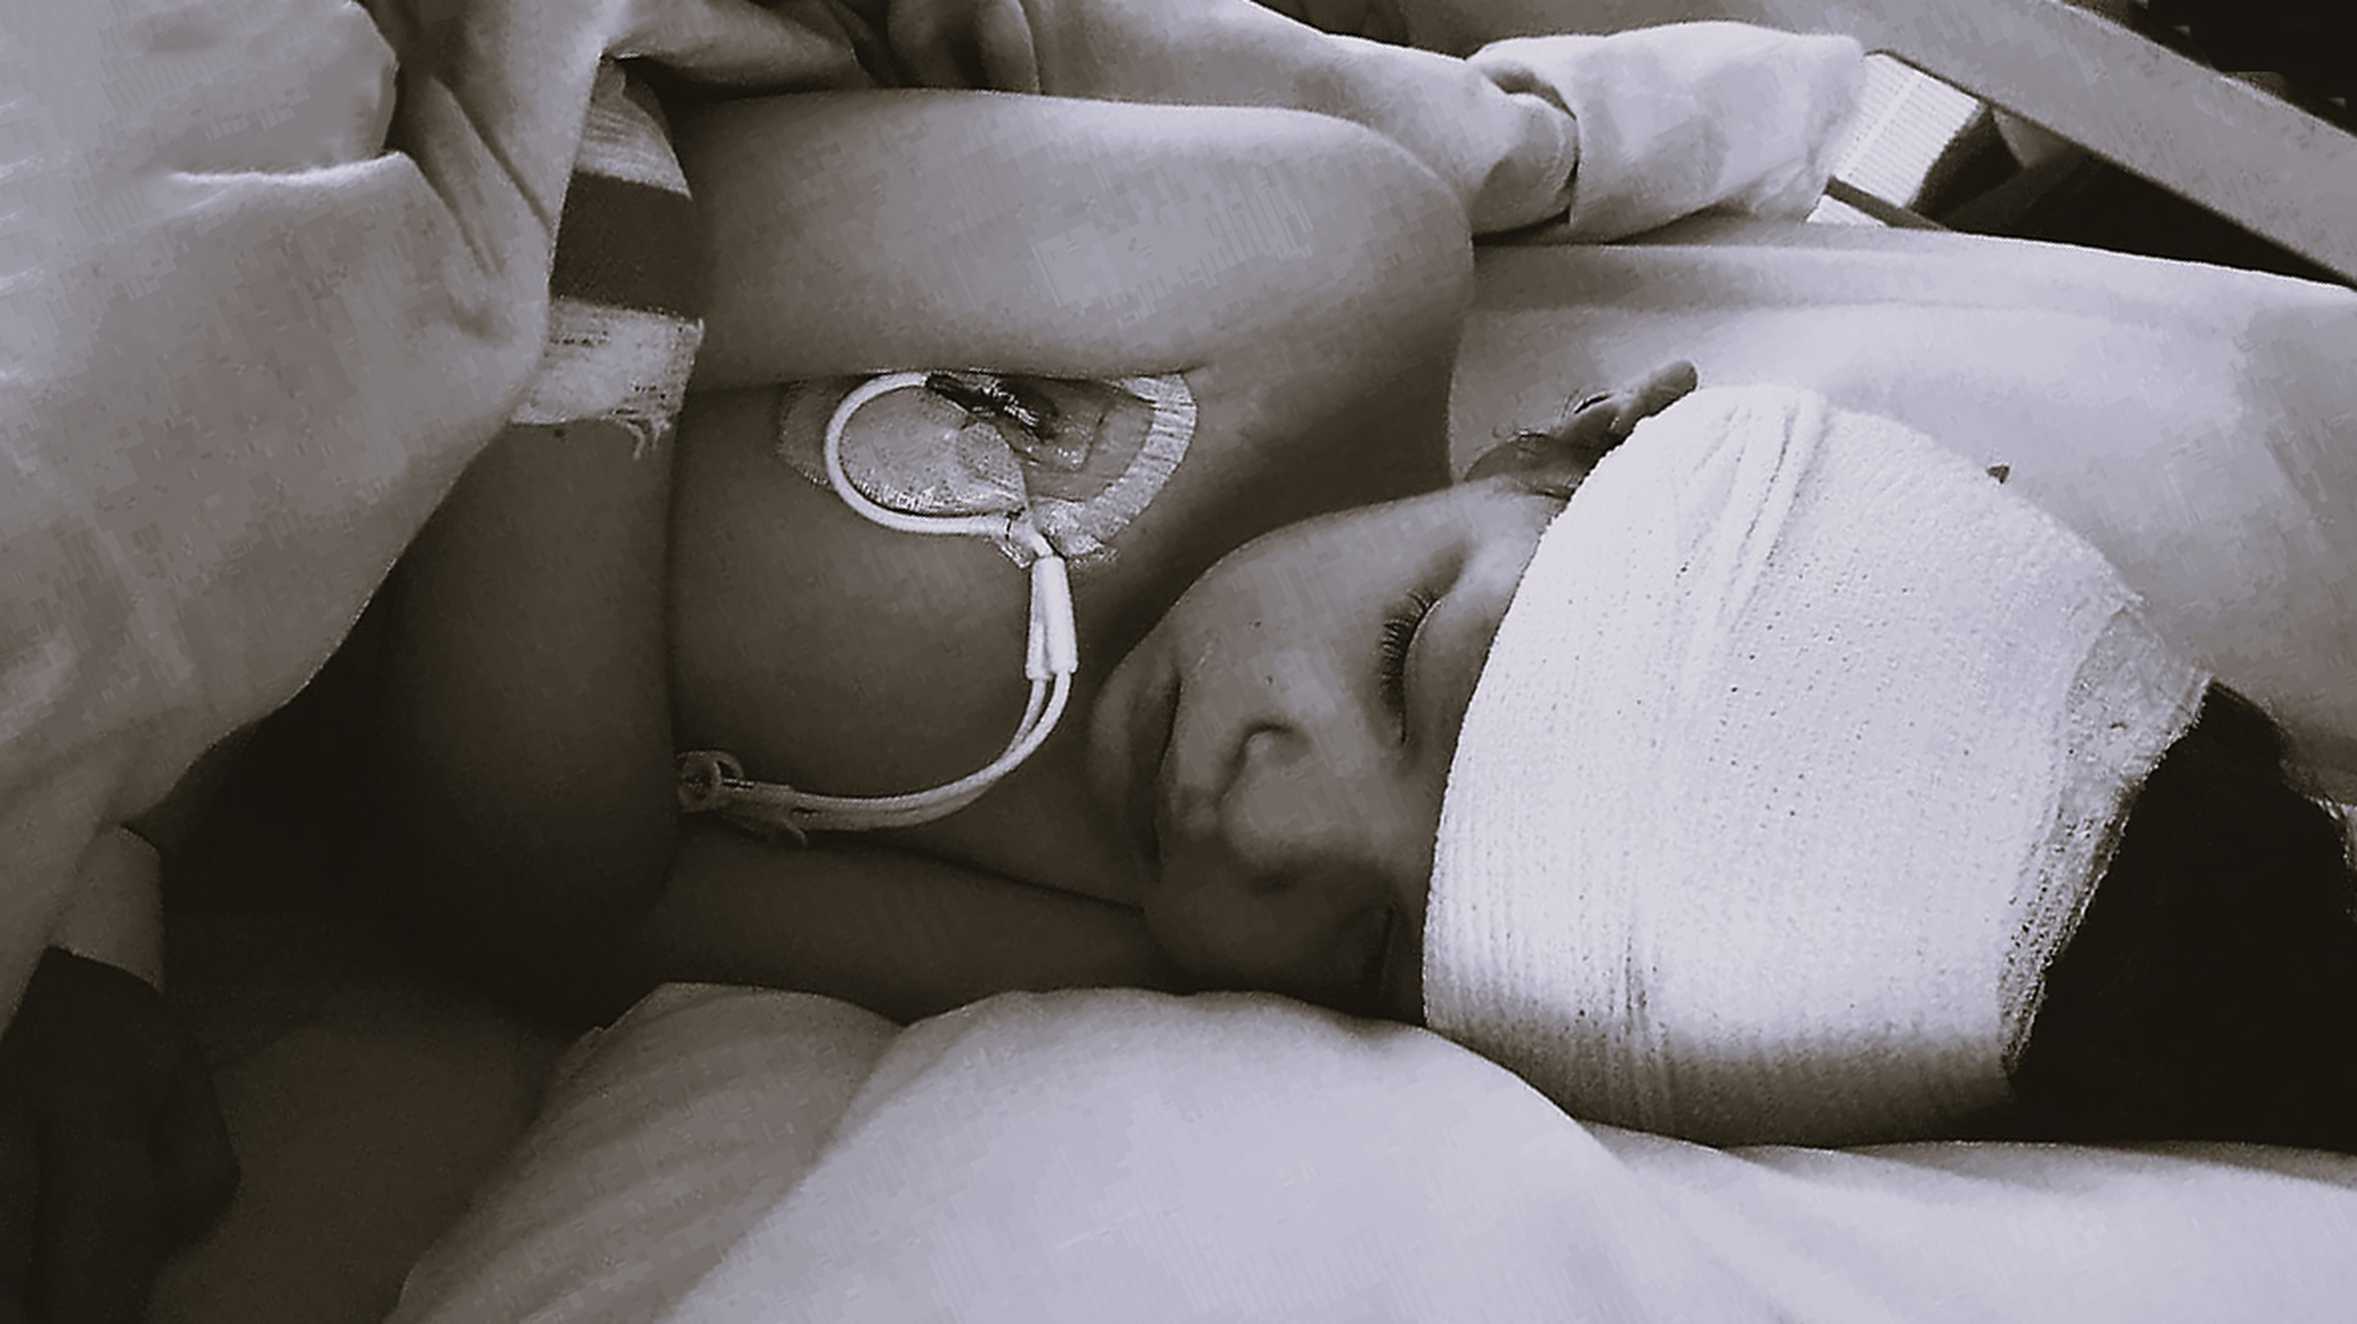 A black and white image of wish child, Aaron lying in his hospital bed, undergoing treatment for his condition.